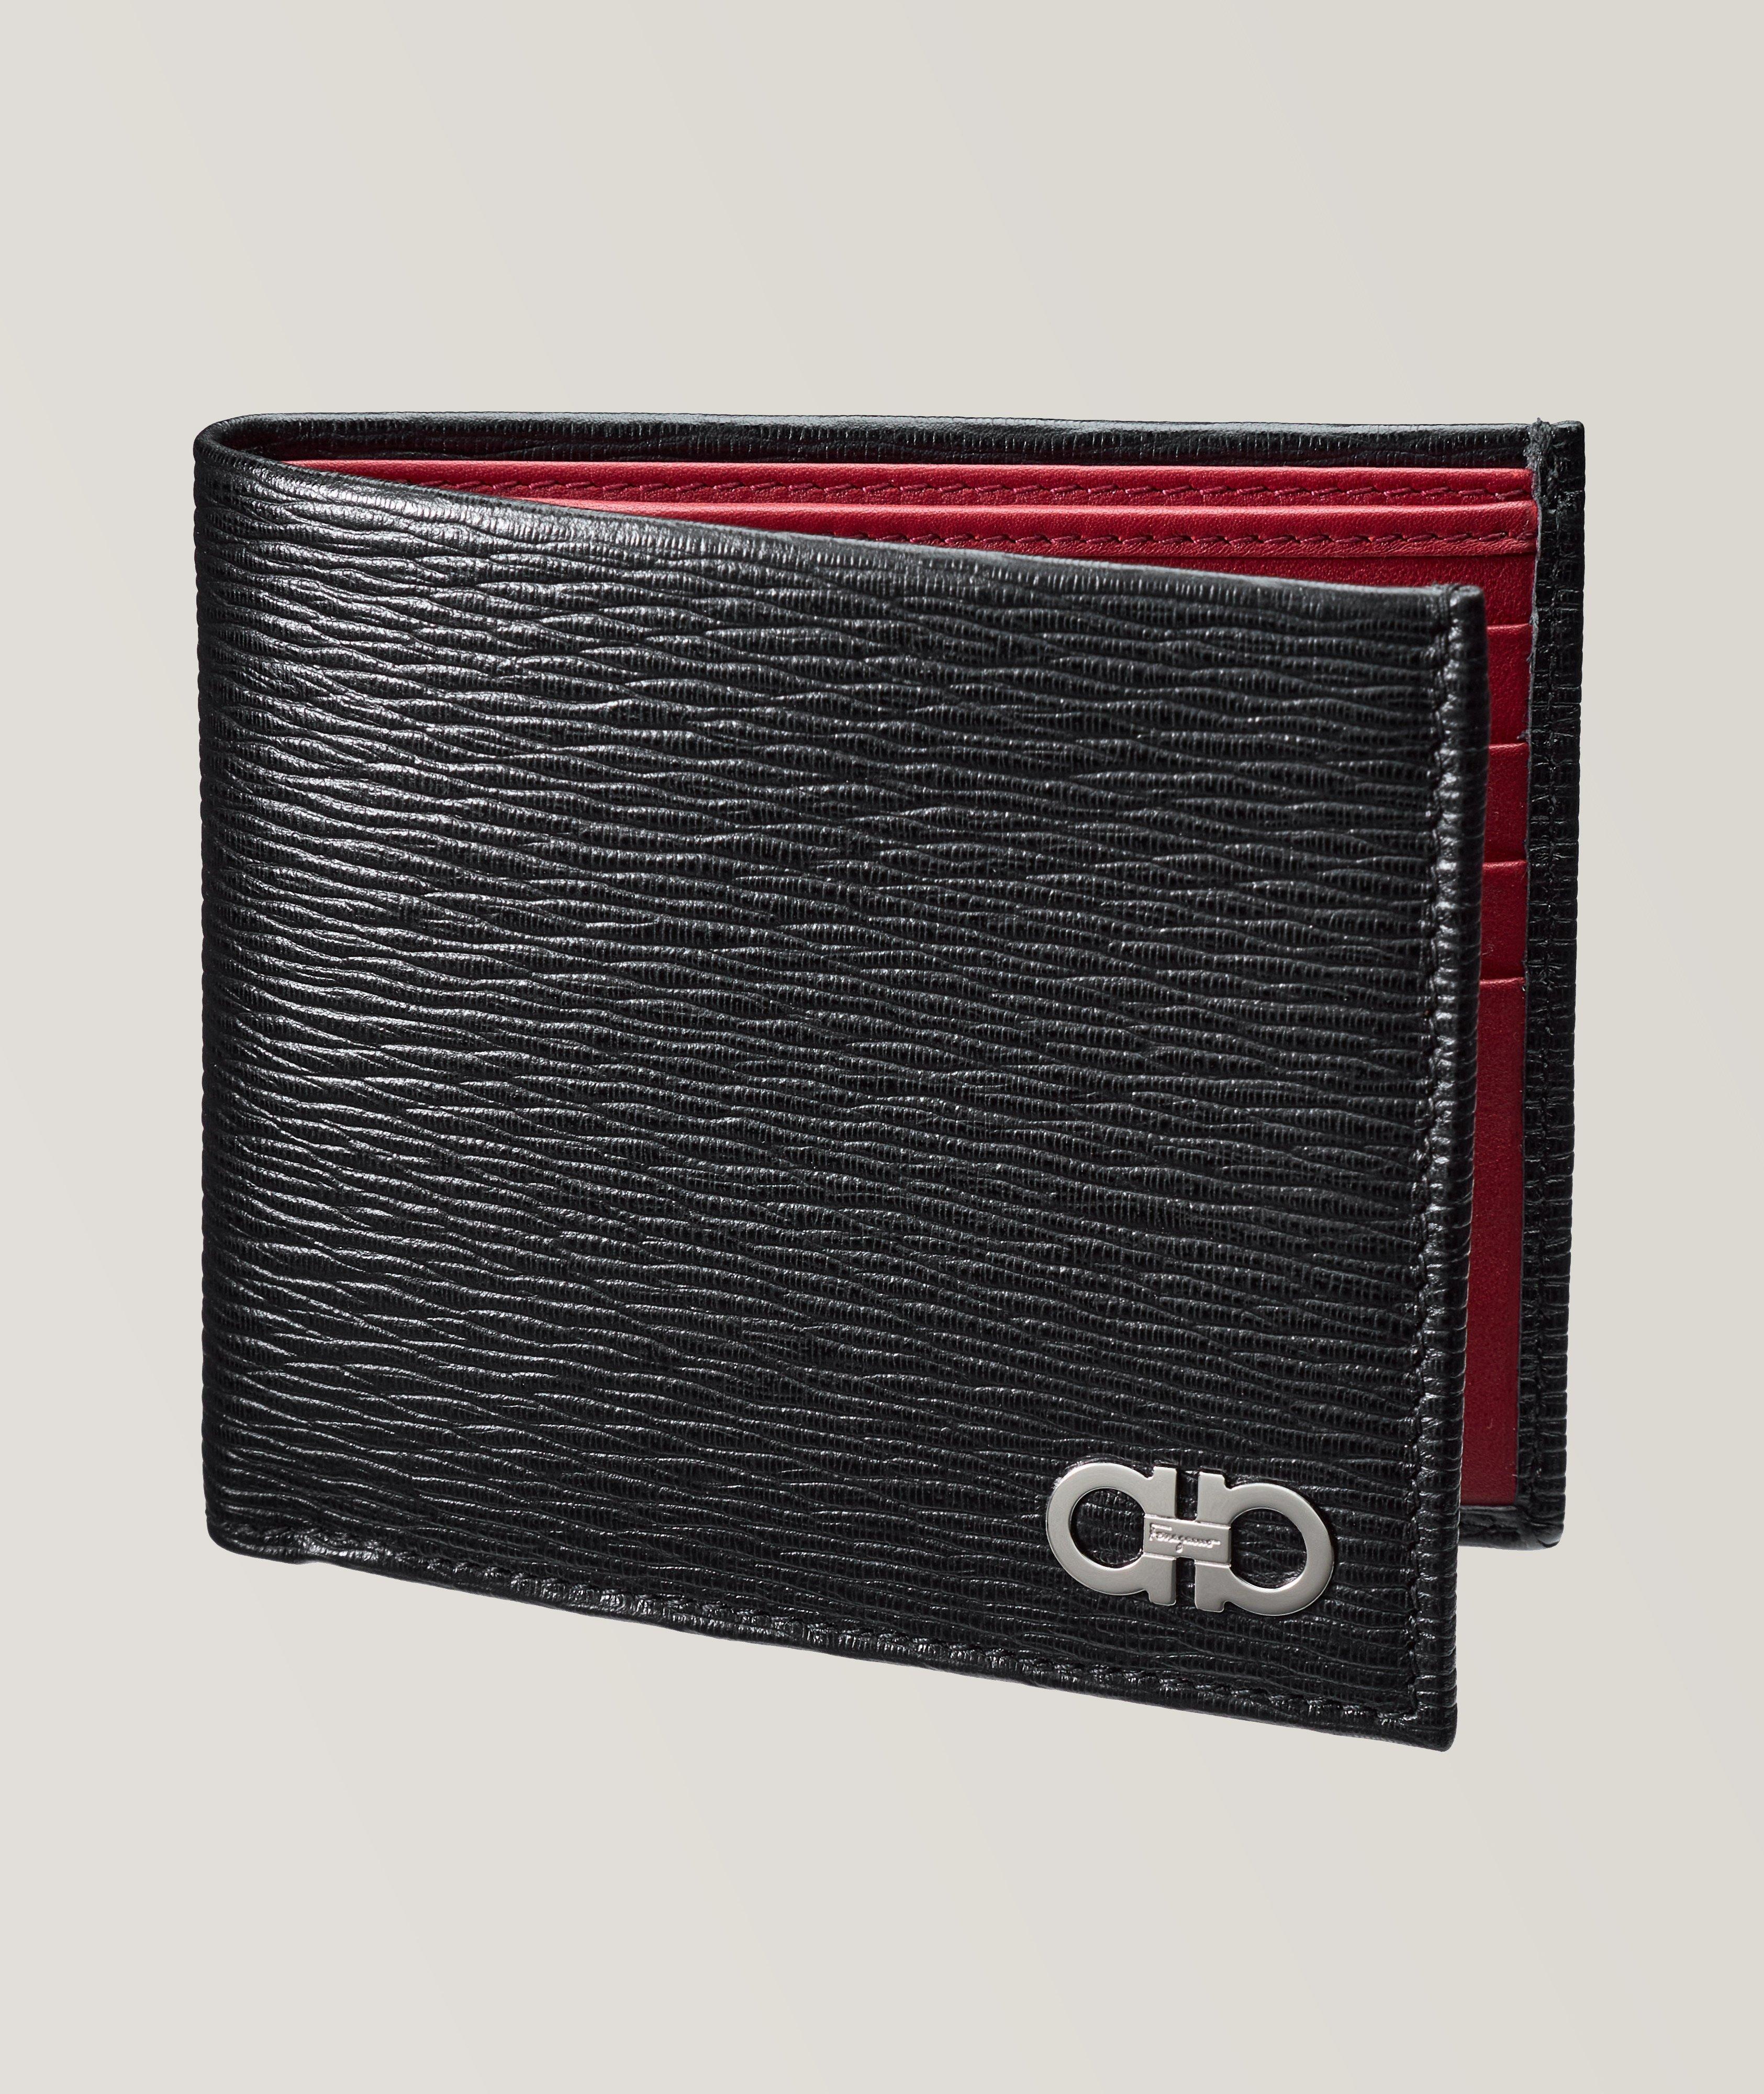 Gancini Textured Leather Bifold Wallet image 0